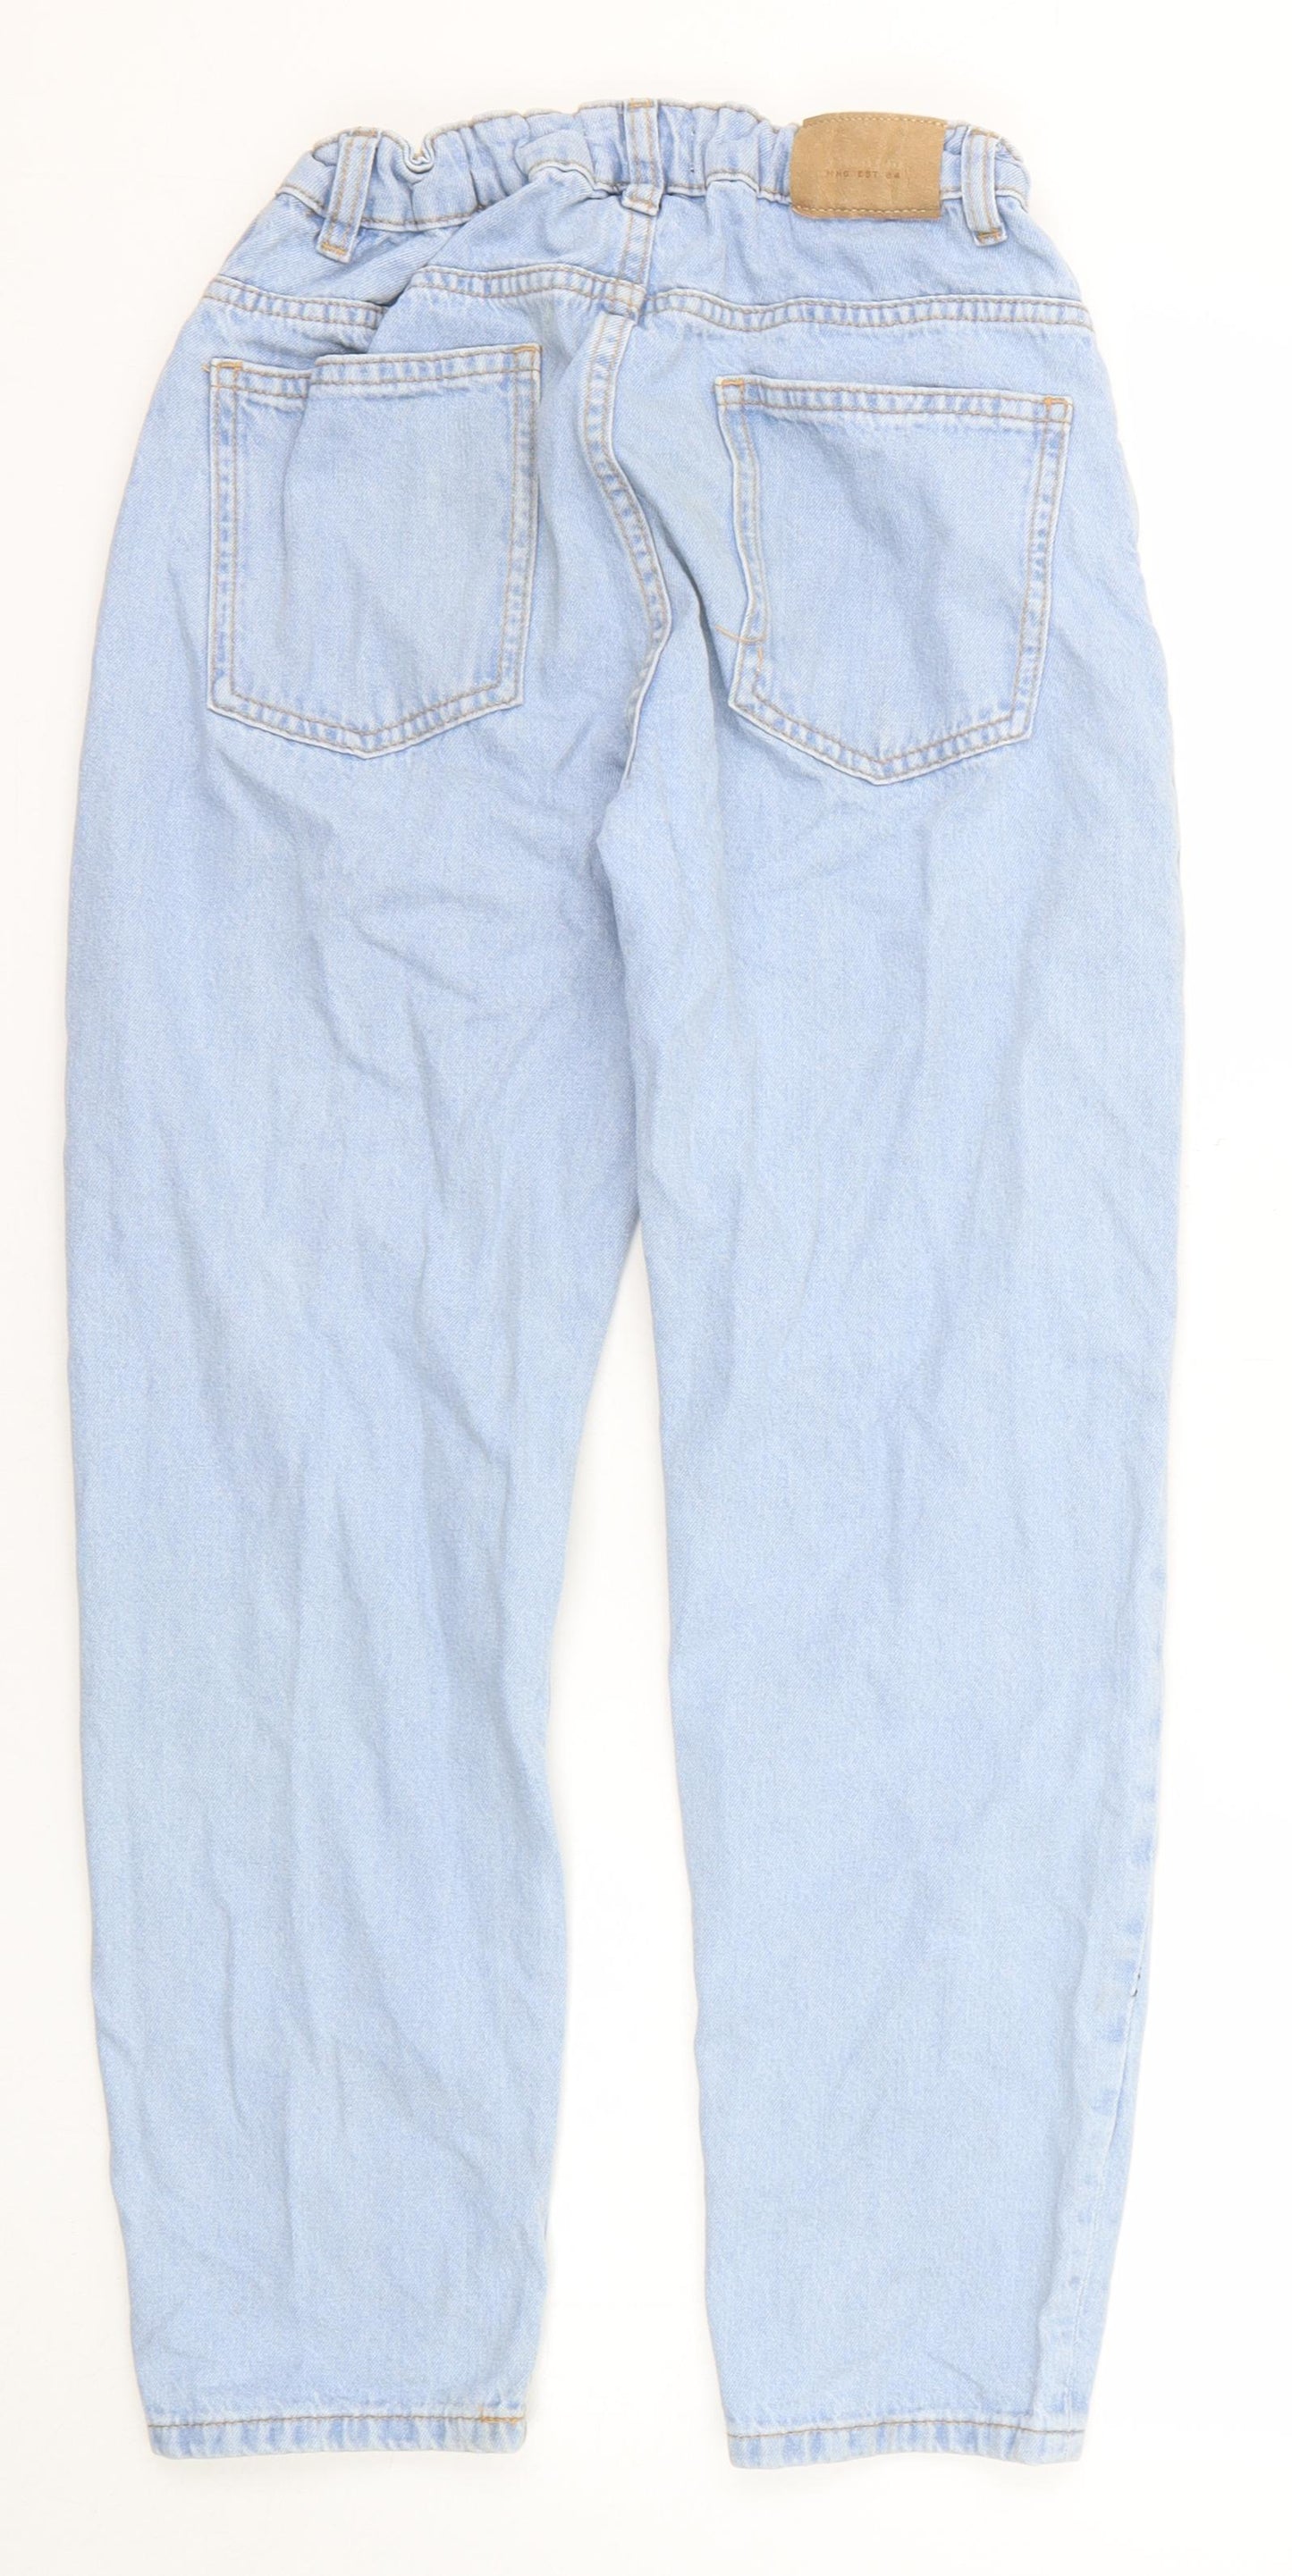 Mango Girls Blue Cotton Tapered Jeans Size 13-14 Years Regular Zip - Distressed